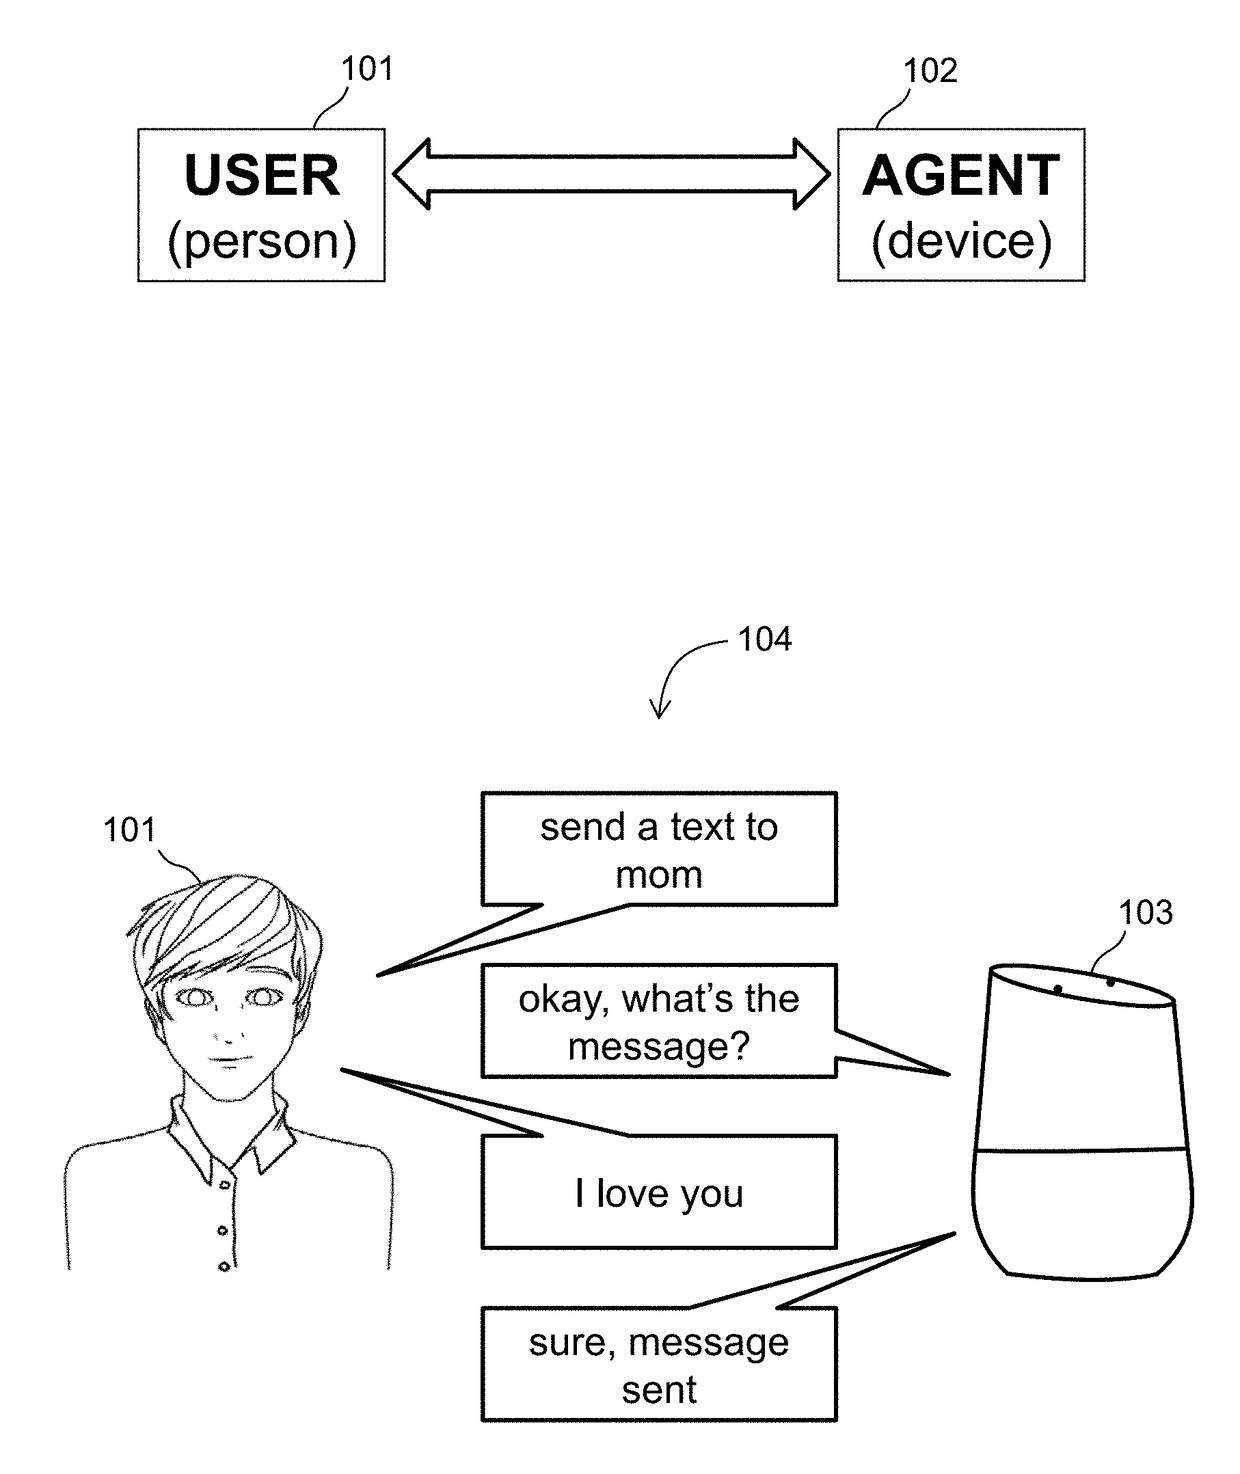 Managing agent engagement in a man-machine dialog